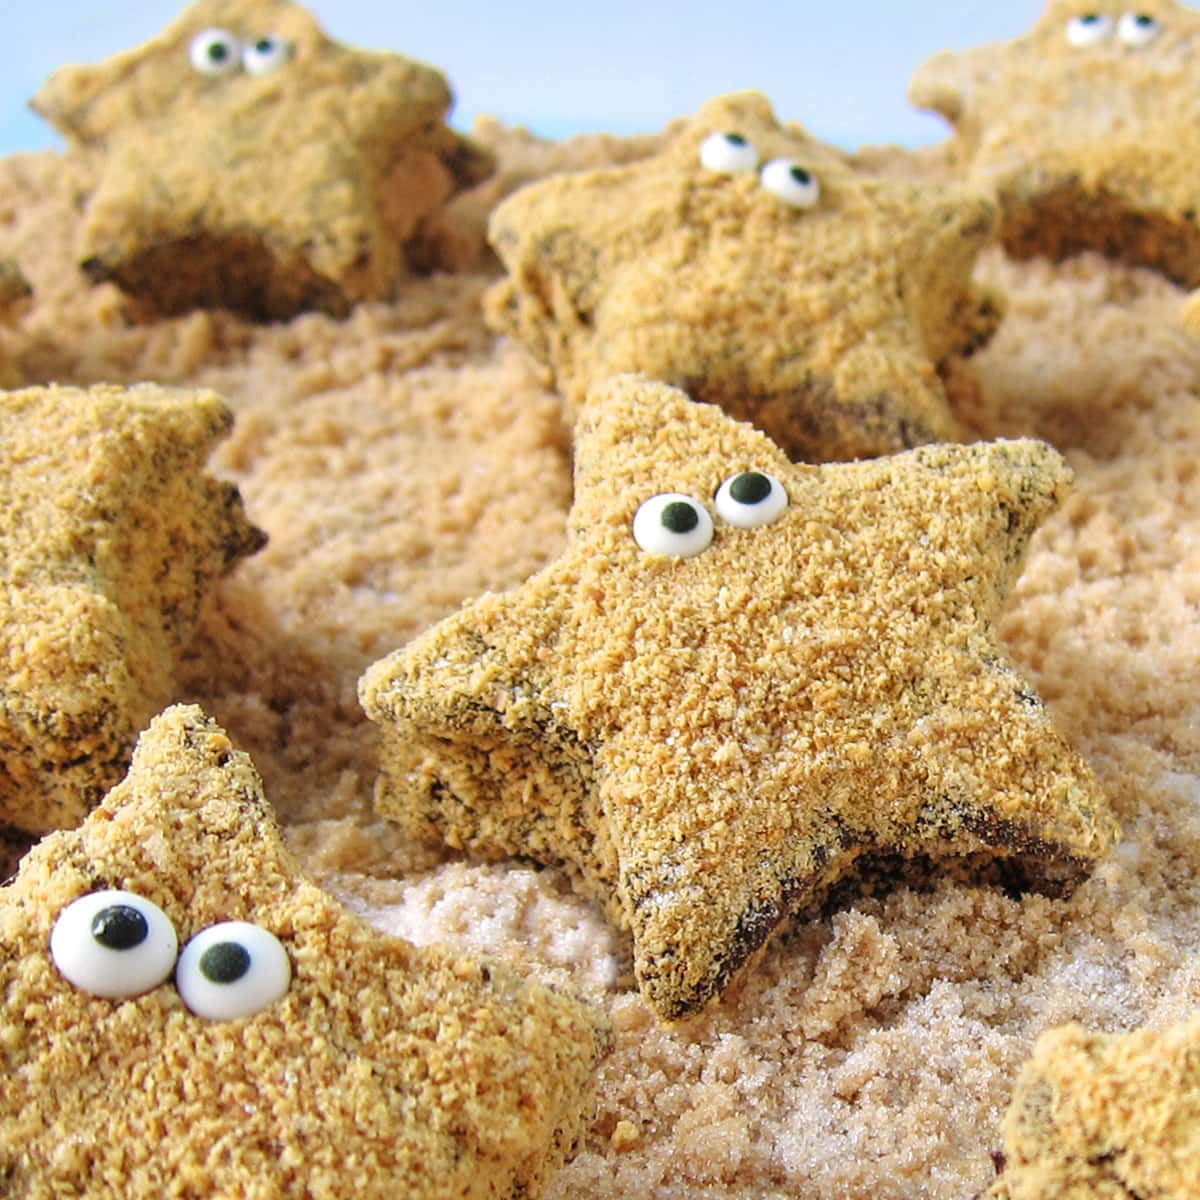 homemade chocolate-dipped marshmallow starfish s'mores topped with graham cracker crumbs with candy eyes are arranged on brown and white sugar sand.